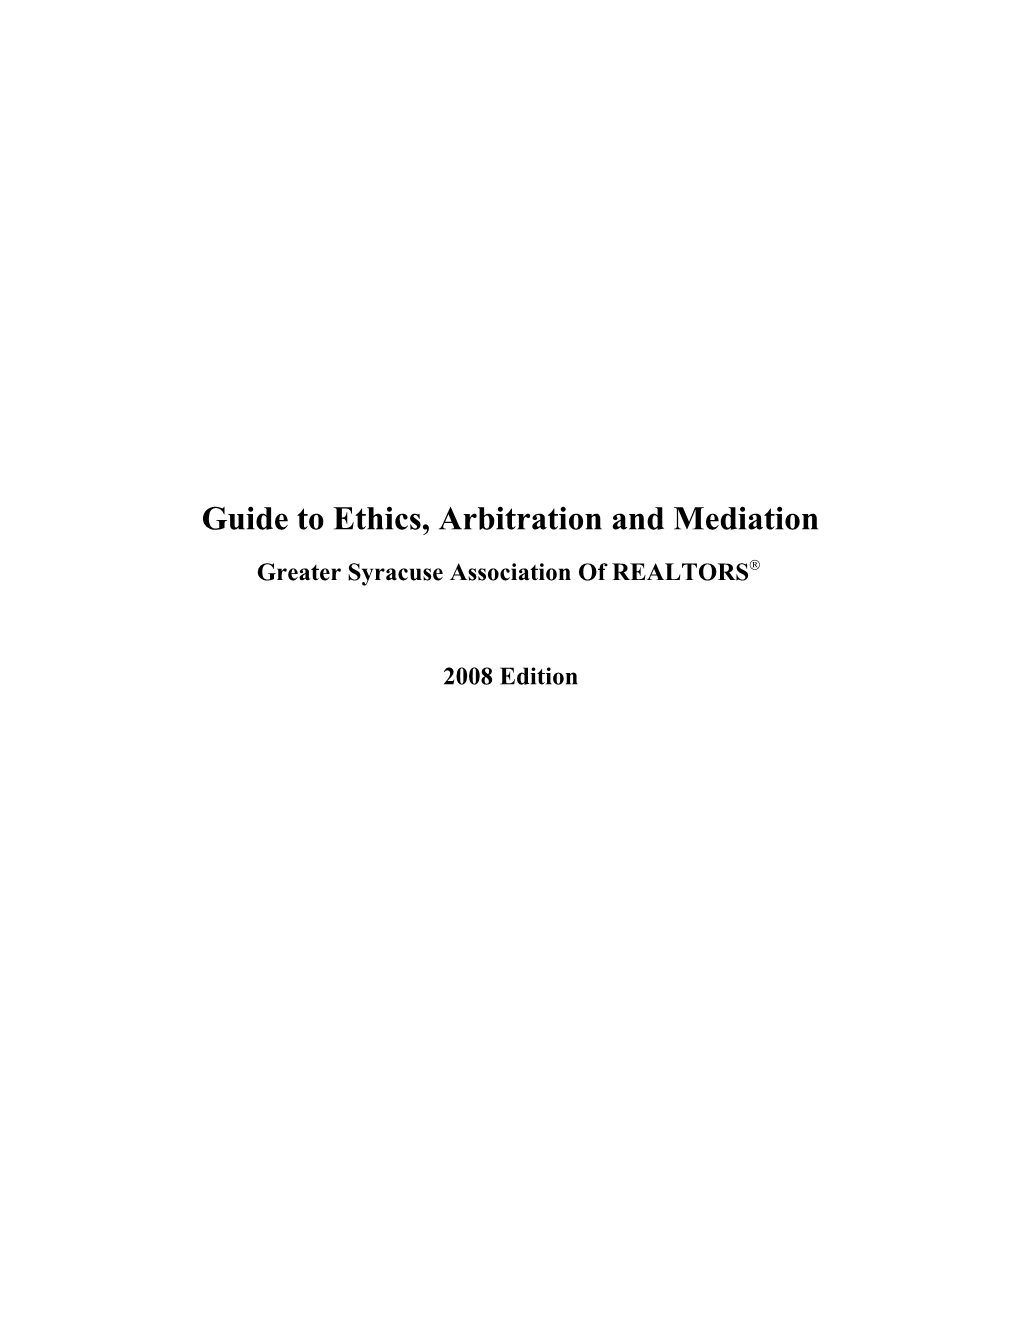 Guide to Ethics, Arbitration and Mediation